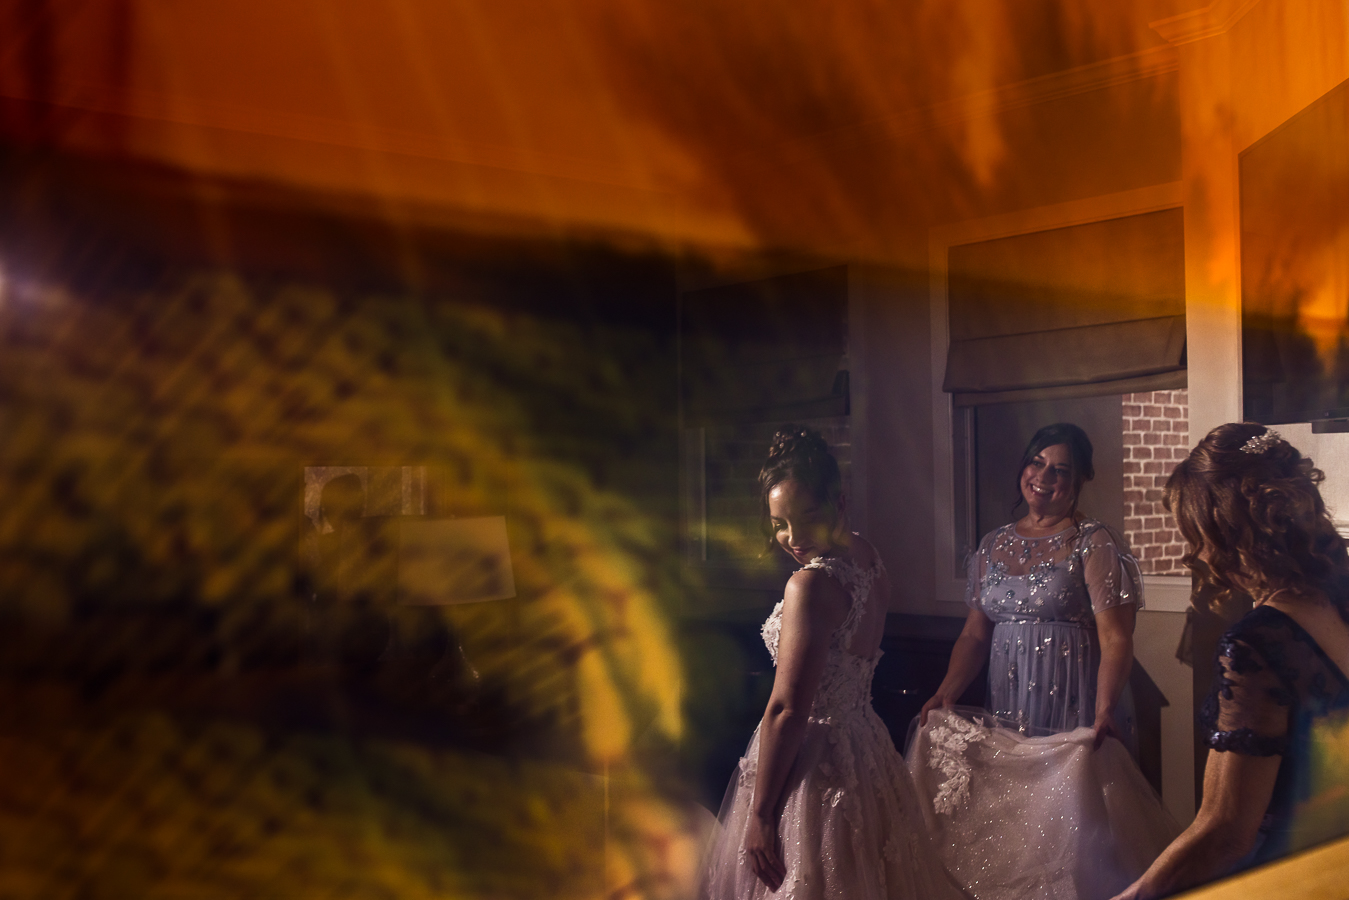 creative, unique bridal portrait of the bride as her bridesmaids help her get ready and show off her dress in this creative, vibrant reflective wedding preparation photo at Gettysburg hotel